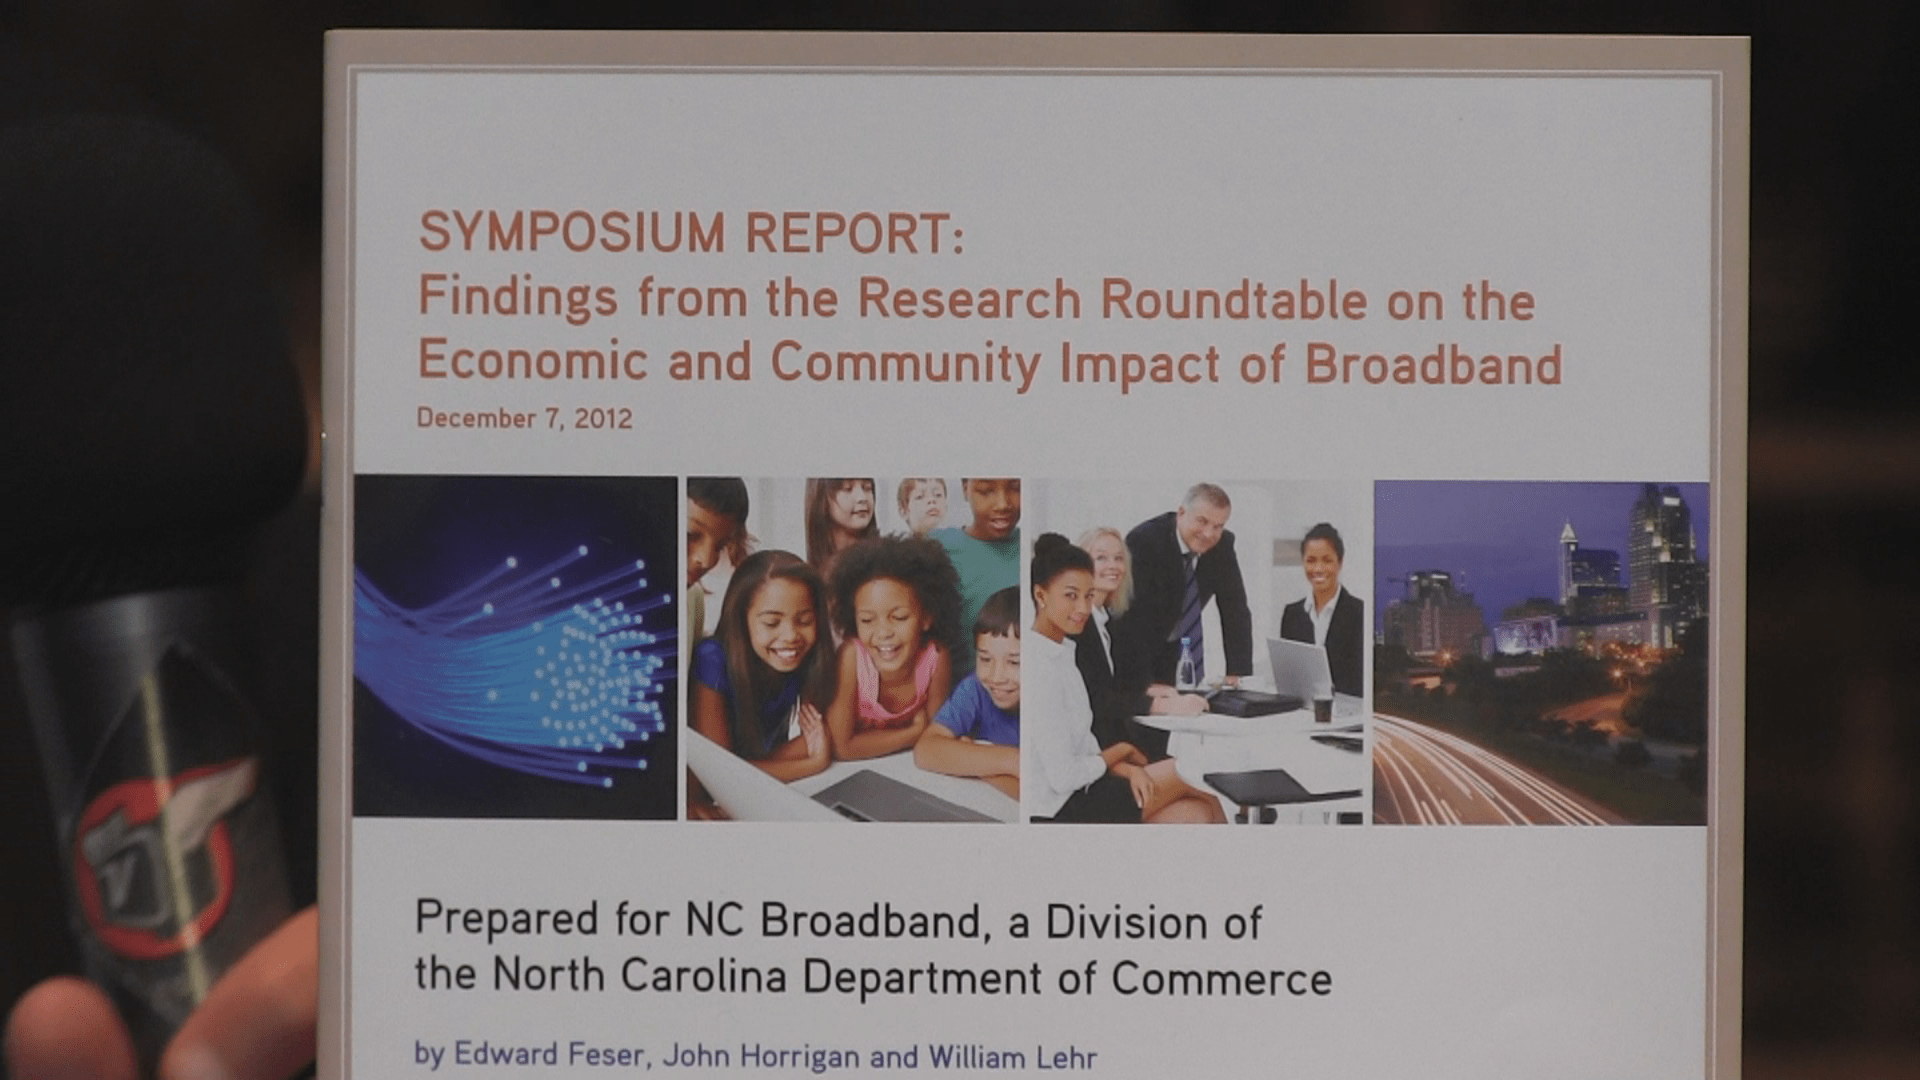 The cover of the NC Broadband Symposium Report, as seen at the 2013 Broadband Communities Summit.